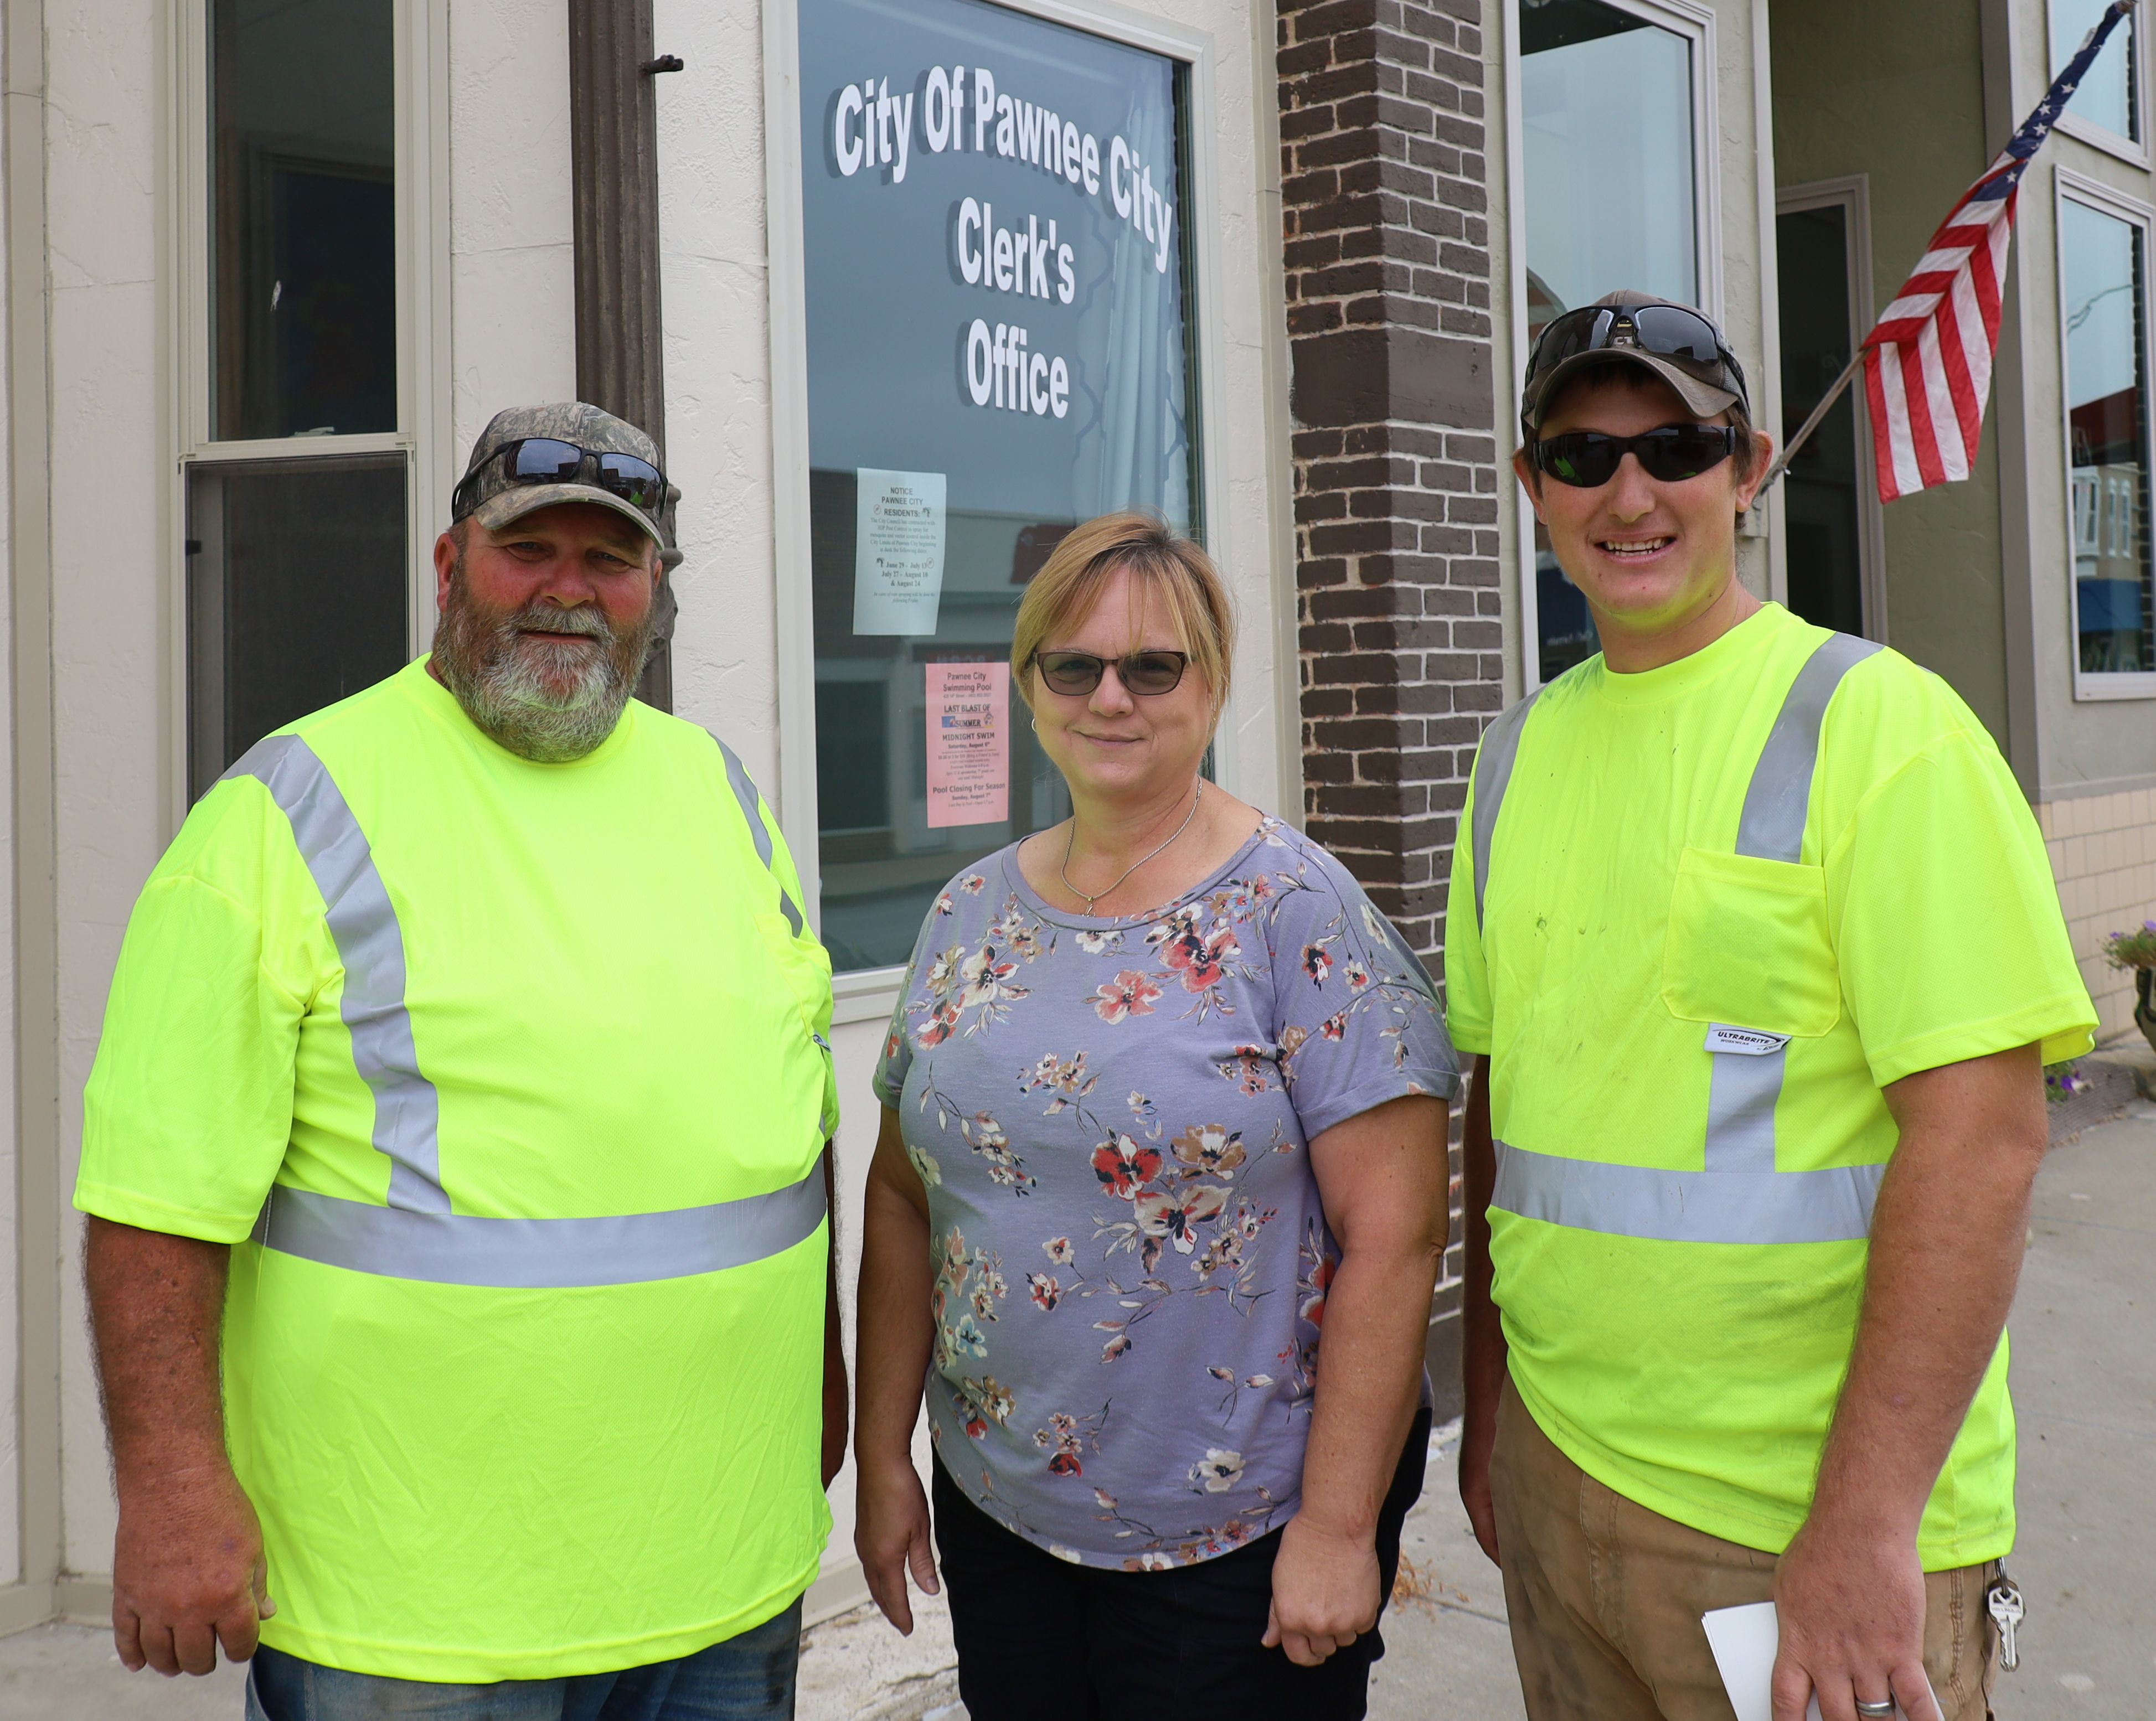 Pawnee City receives Lean on LARM Safety Grant